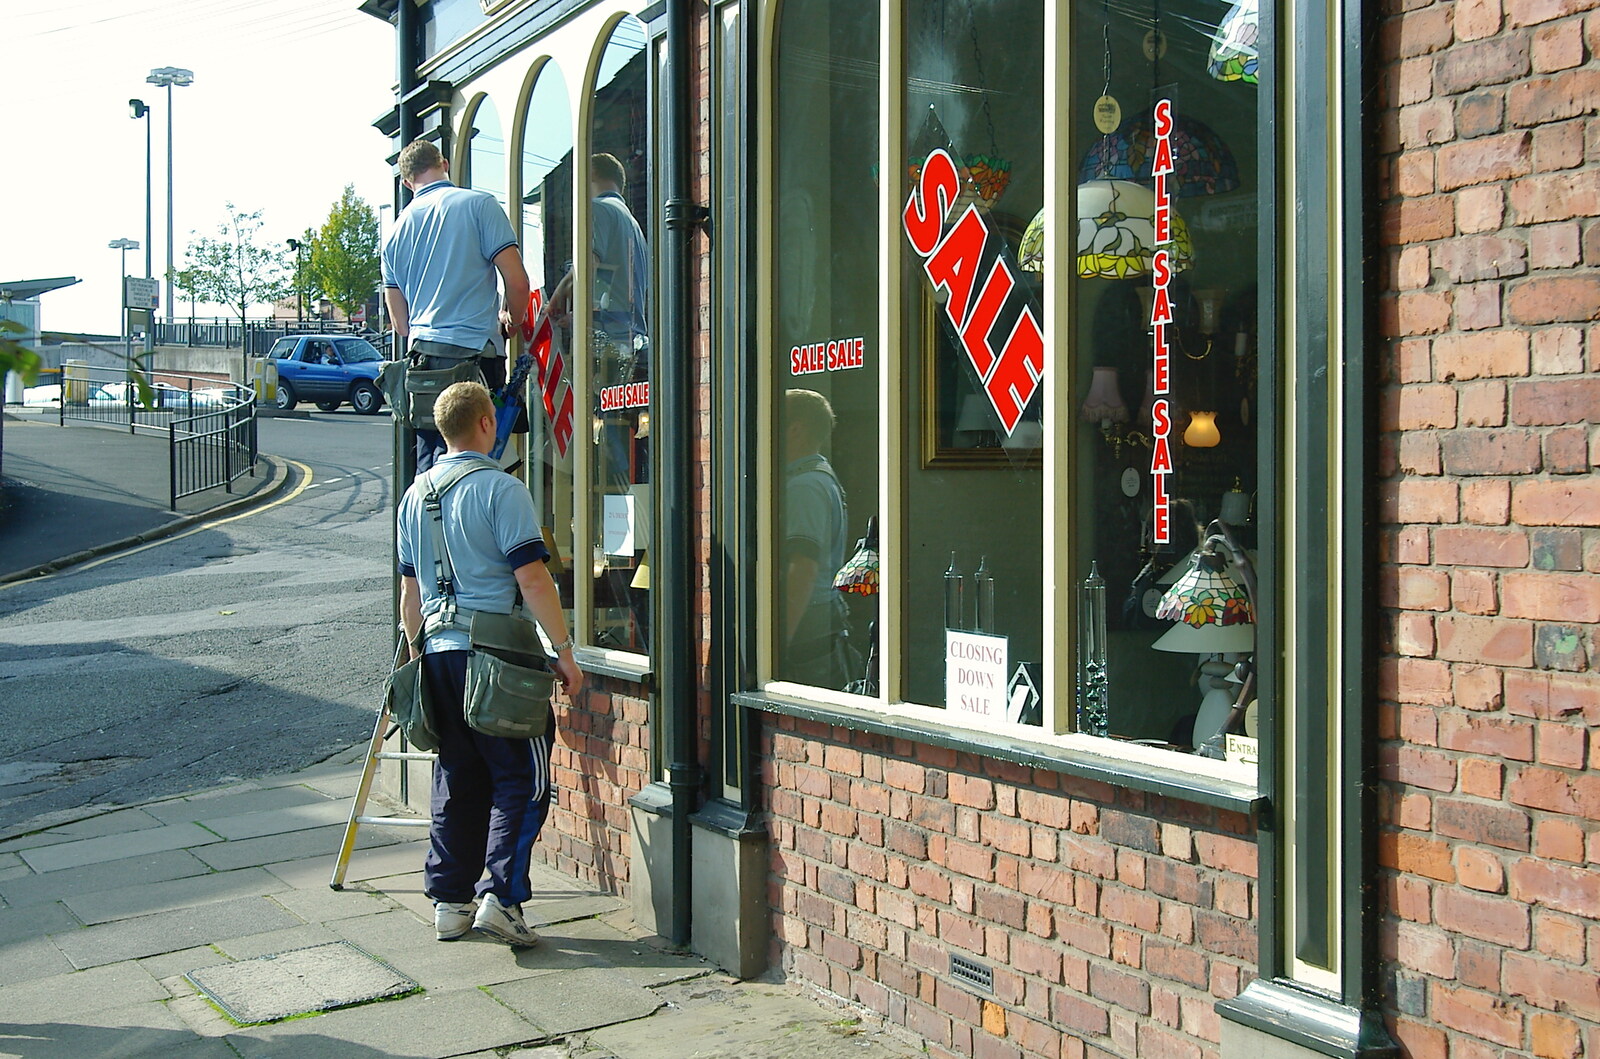 A Trip Around Macclesfield and Sandbach, Cheshire - 10th September 2005: Window cleaners in action